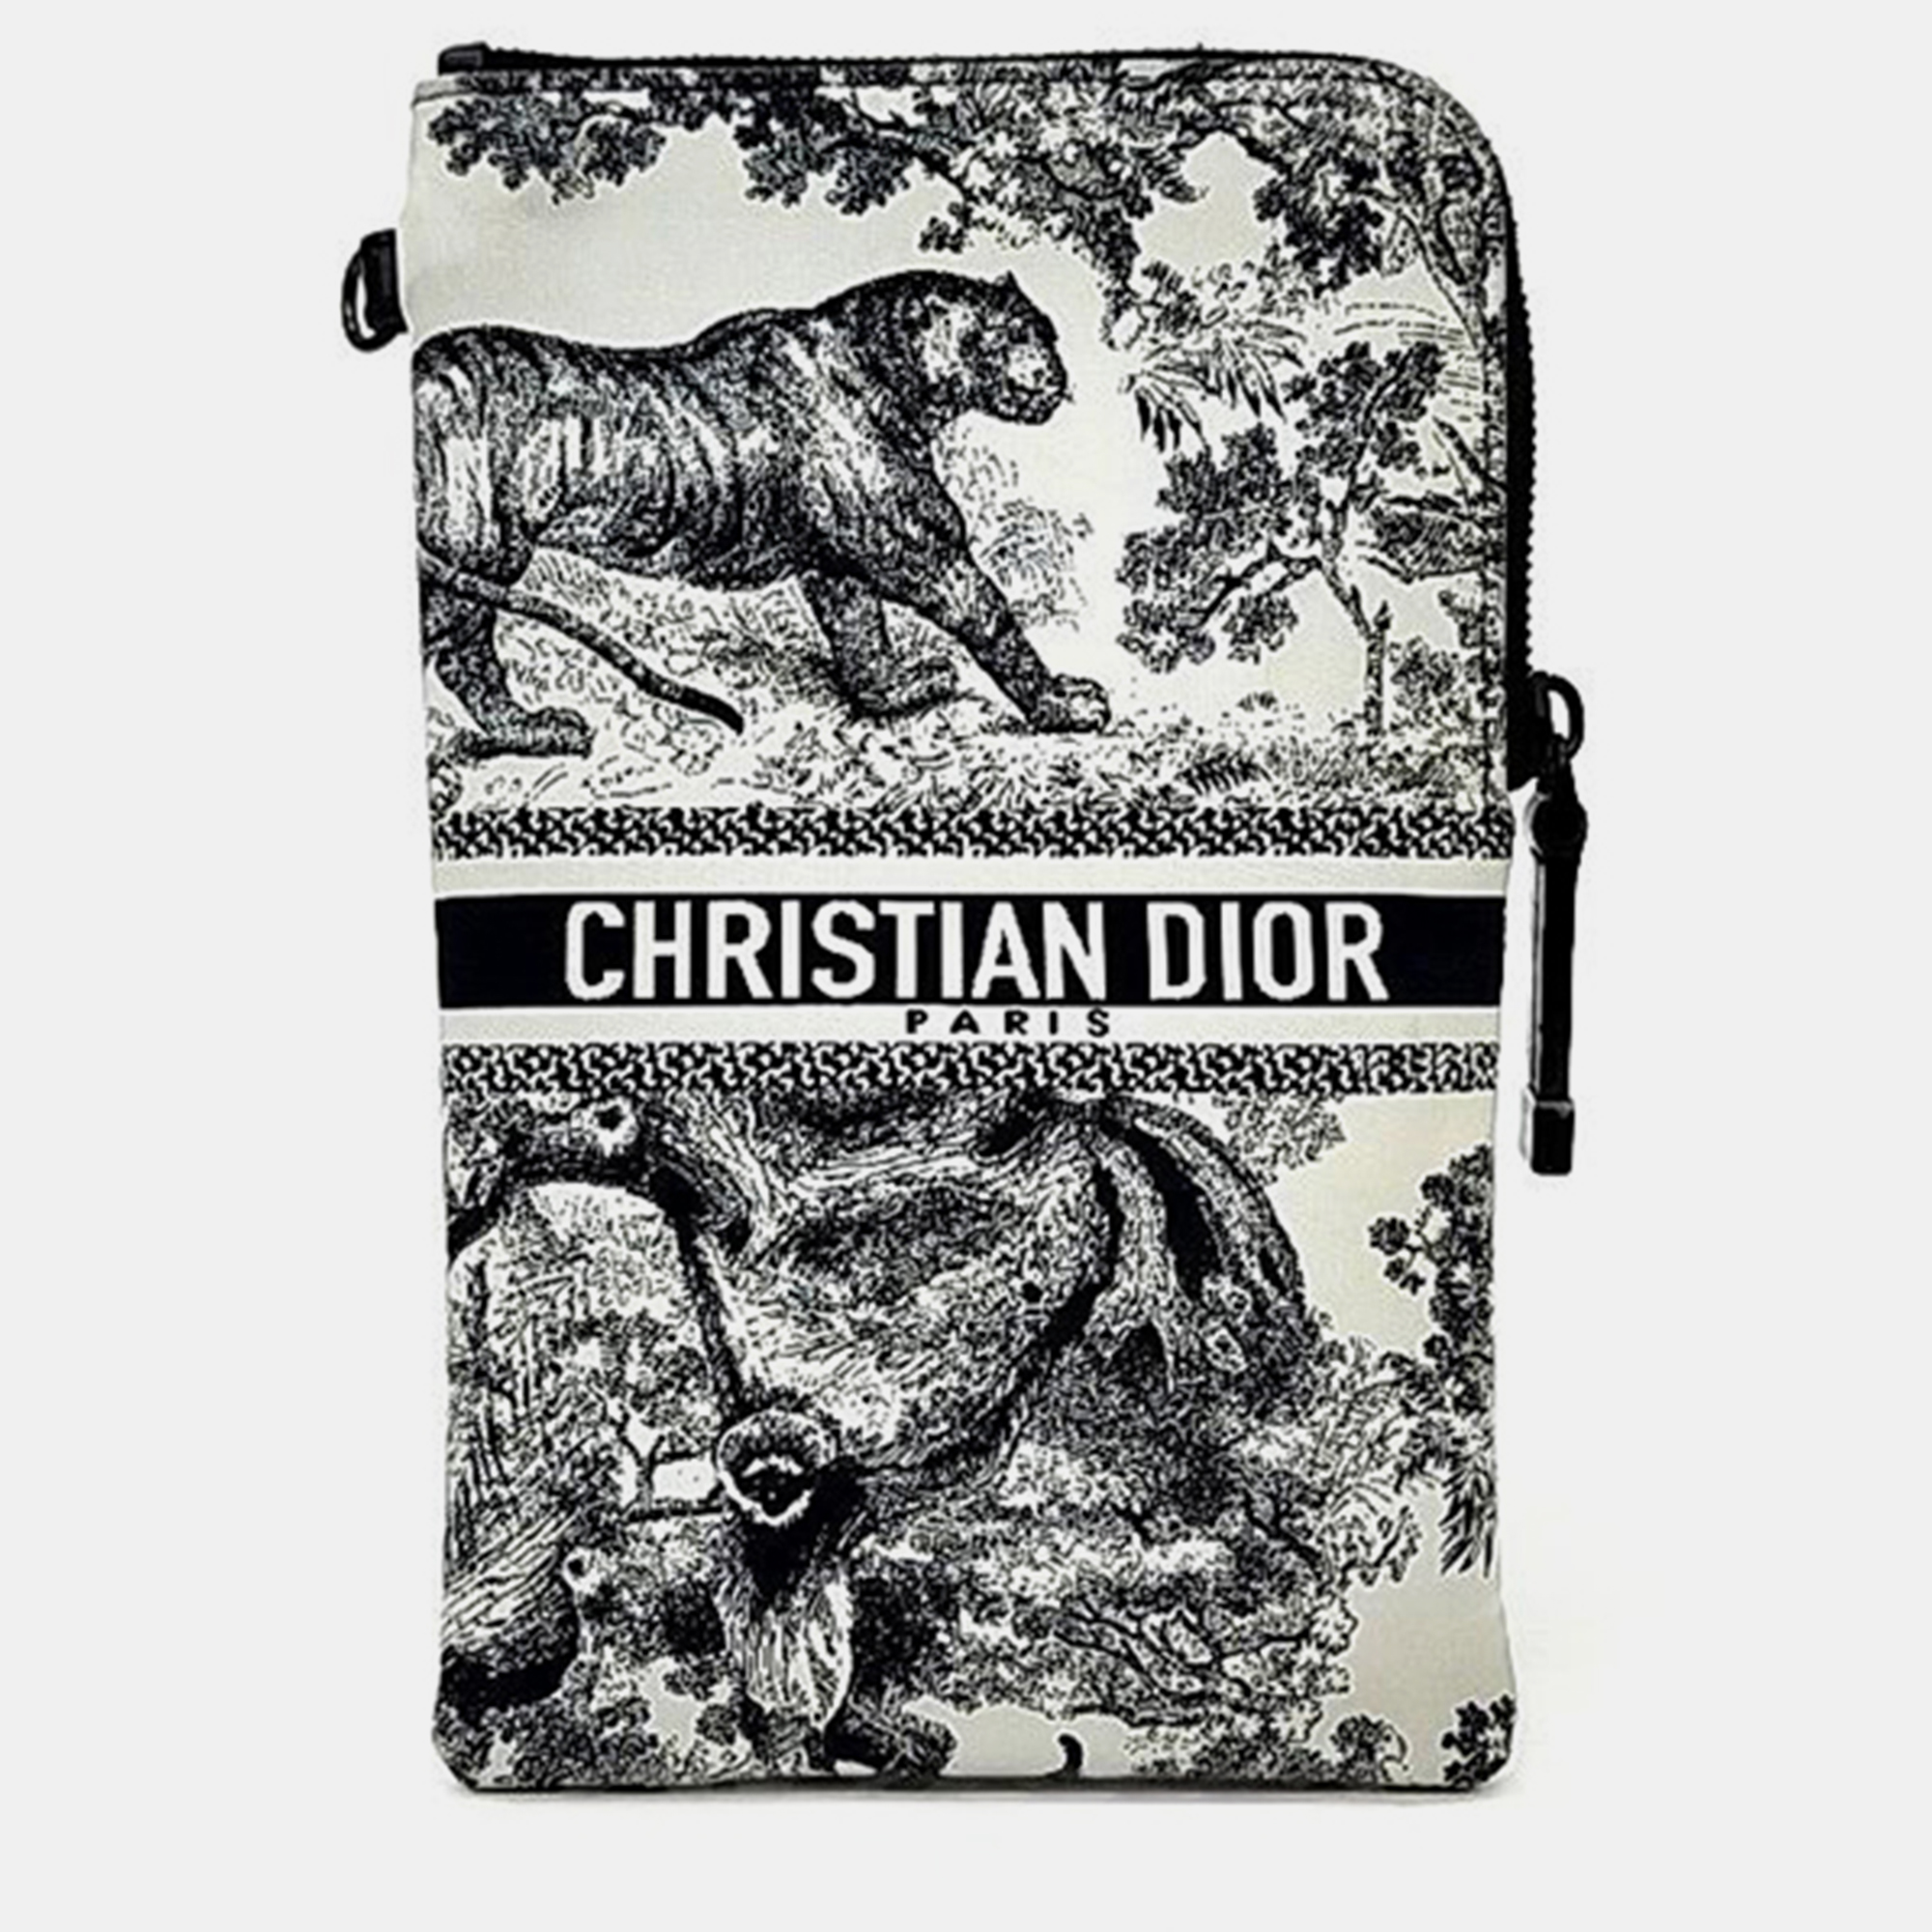 Christian Dior Travel Multifunctional Pouch